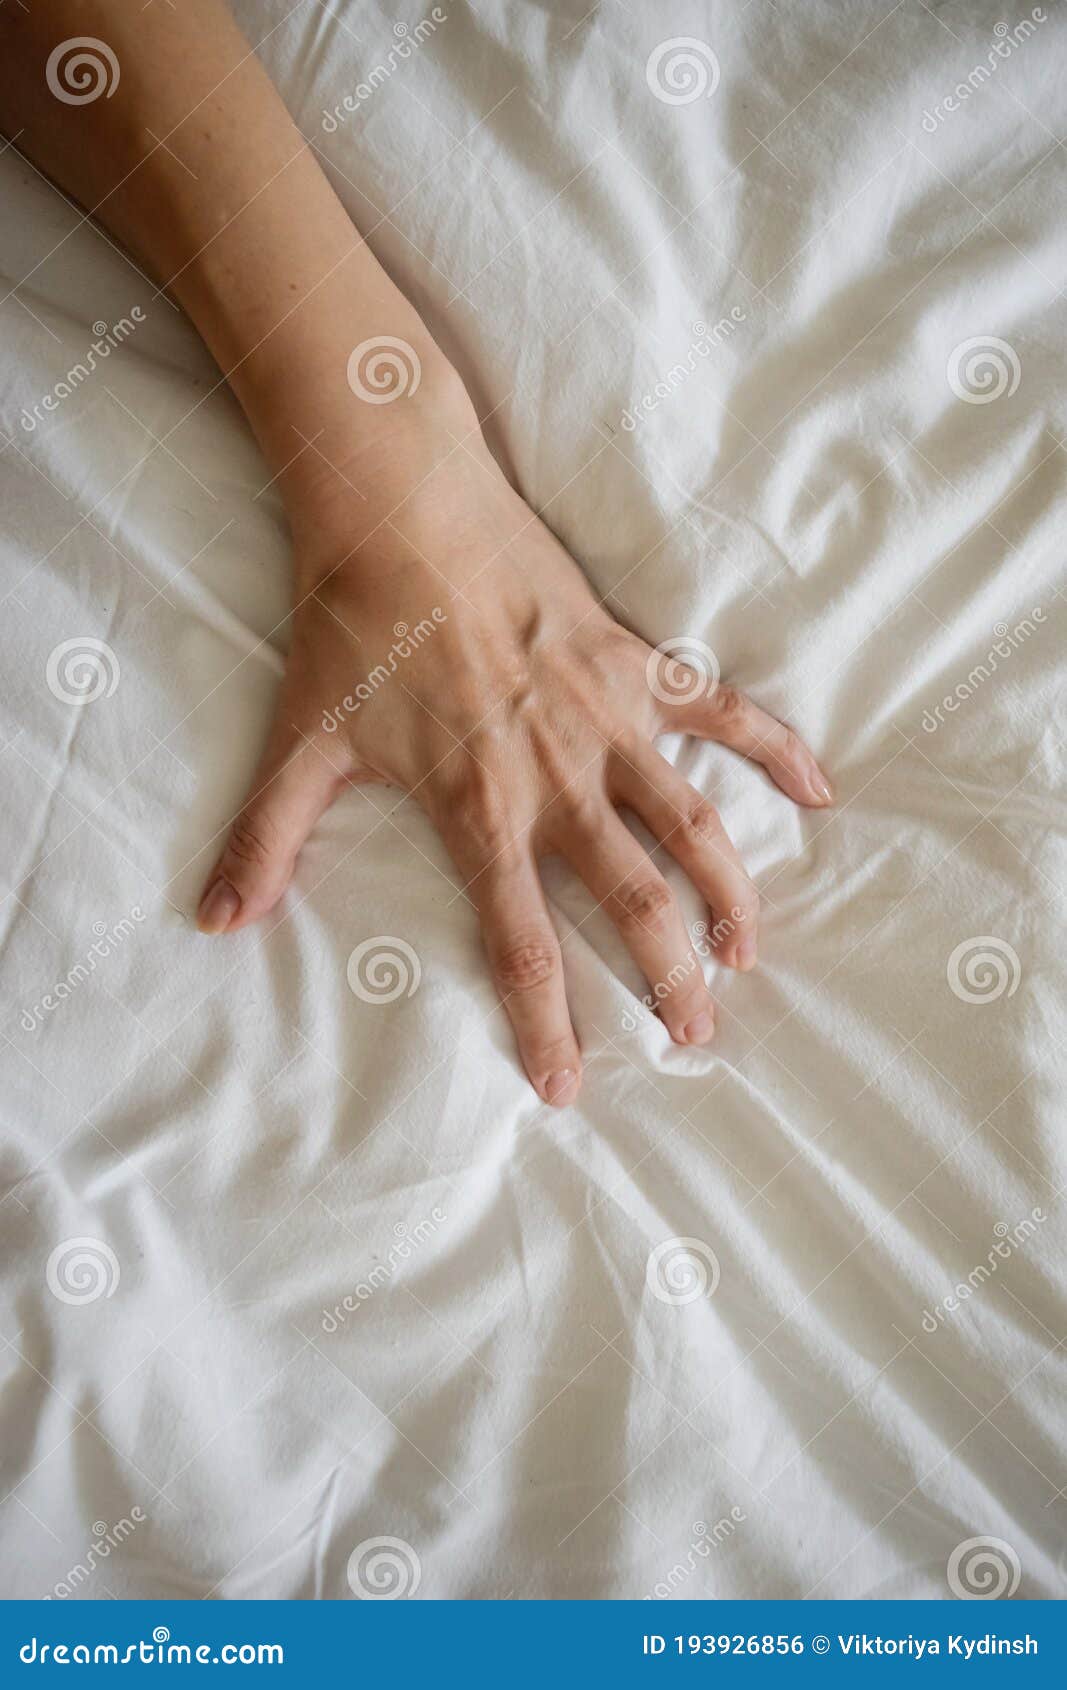 Close Up Woman Hand Pulling and Squeezing White Sheets in Ecstasy in photo picture